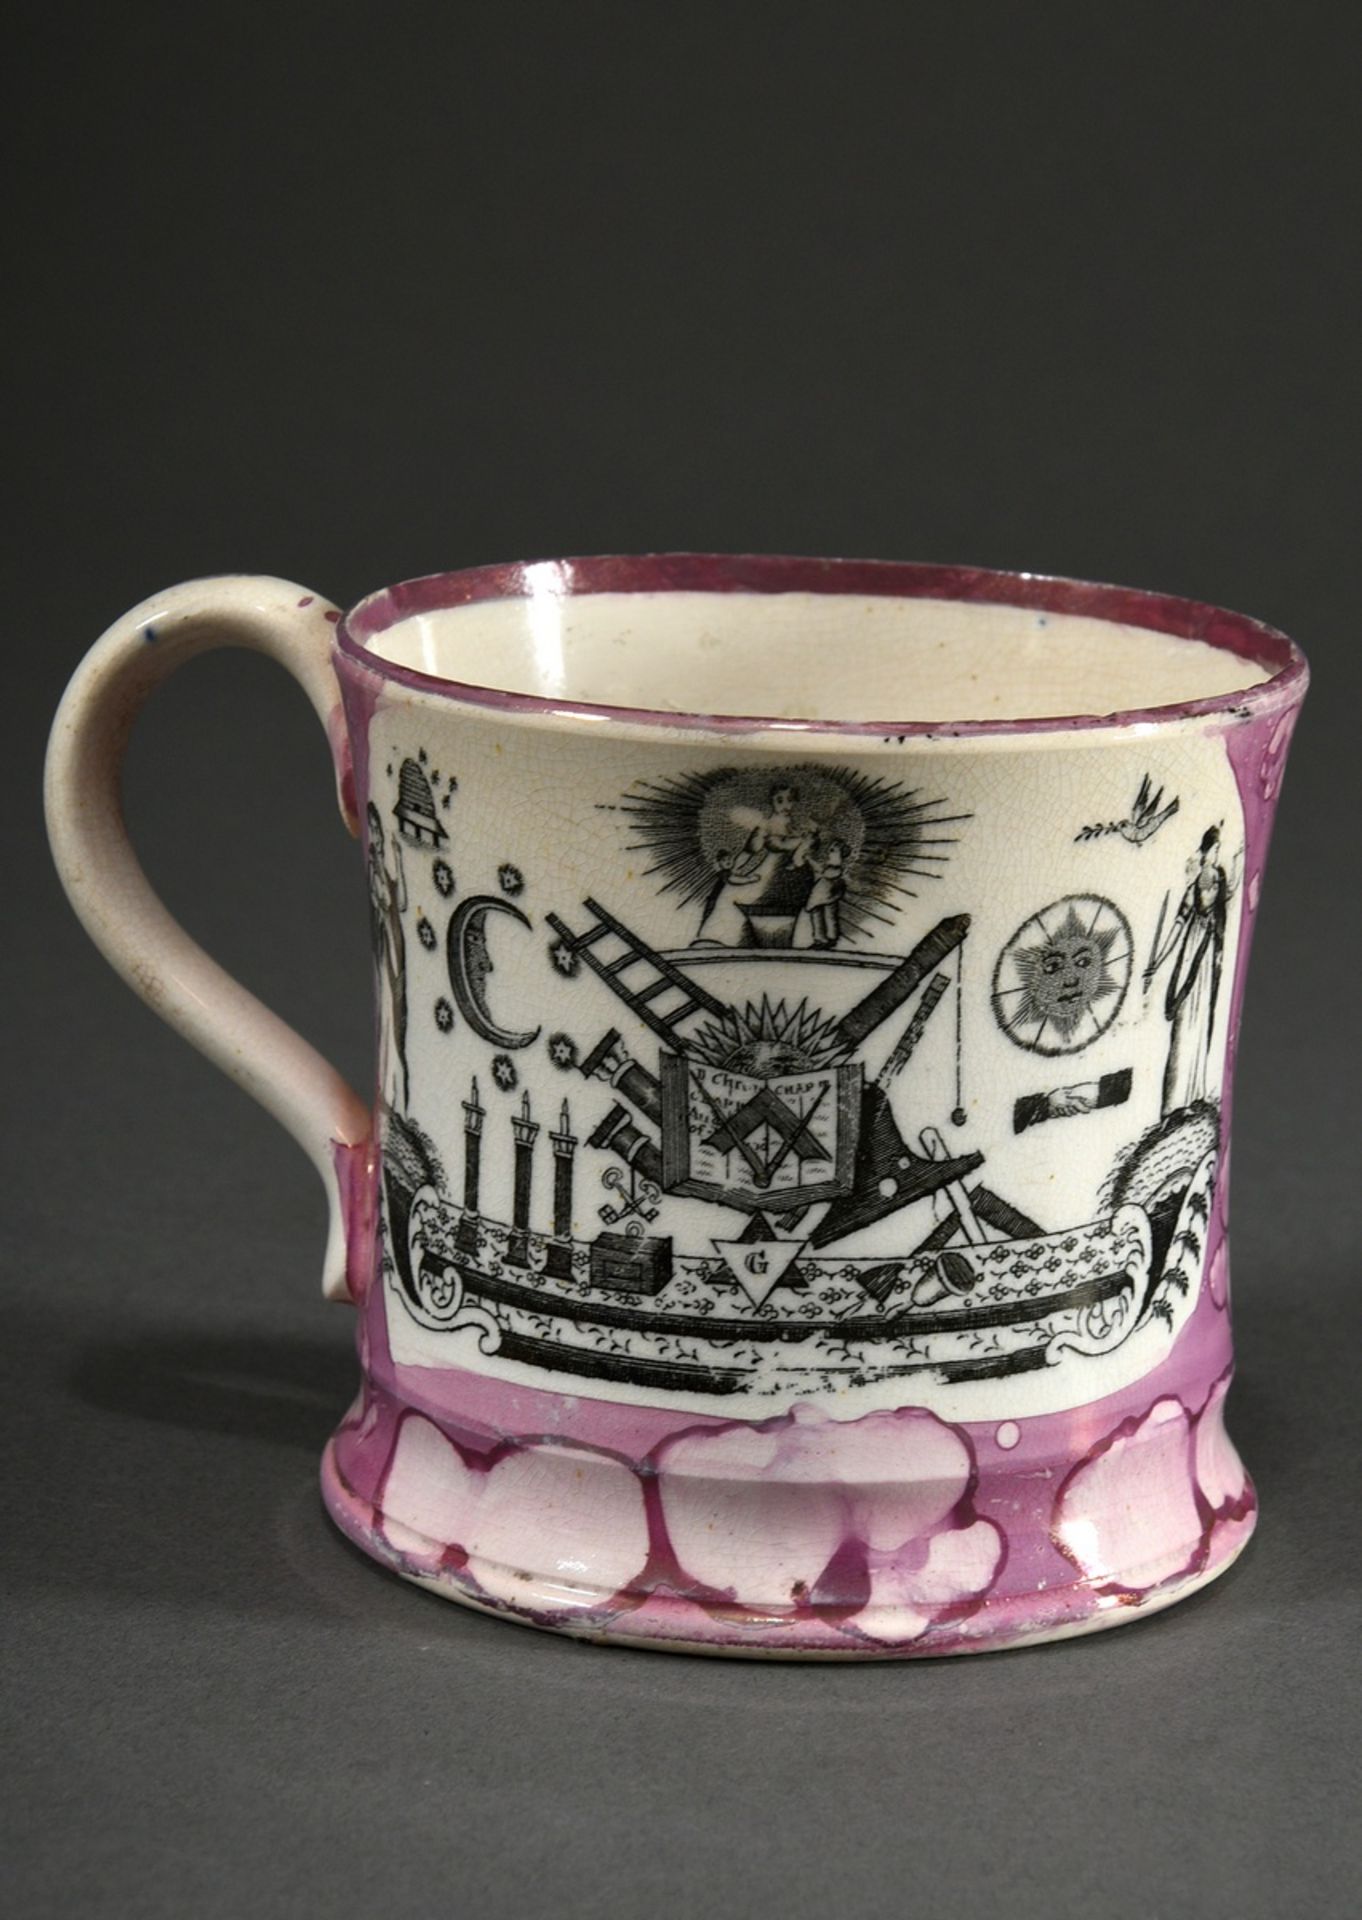 Faience drinking cup with luster and print decoration "Freemason symbols and English text", violet 